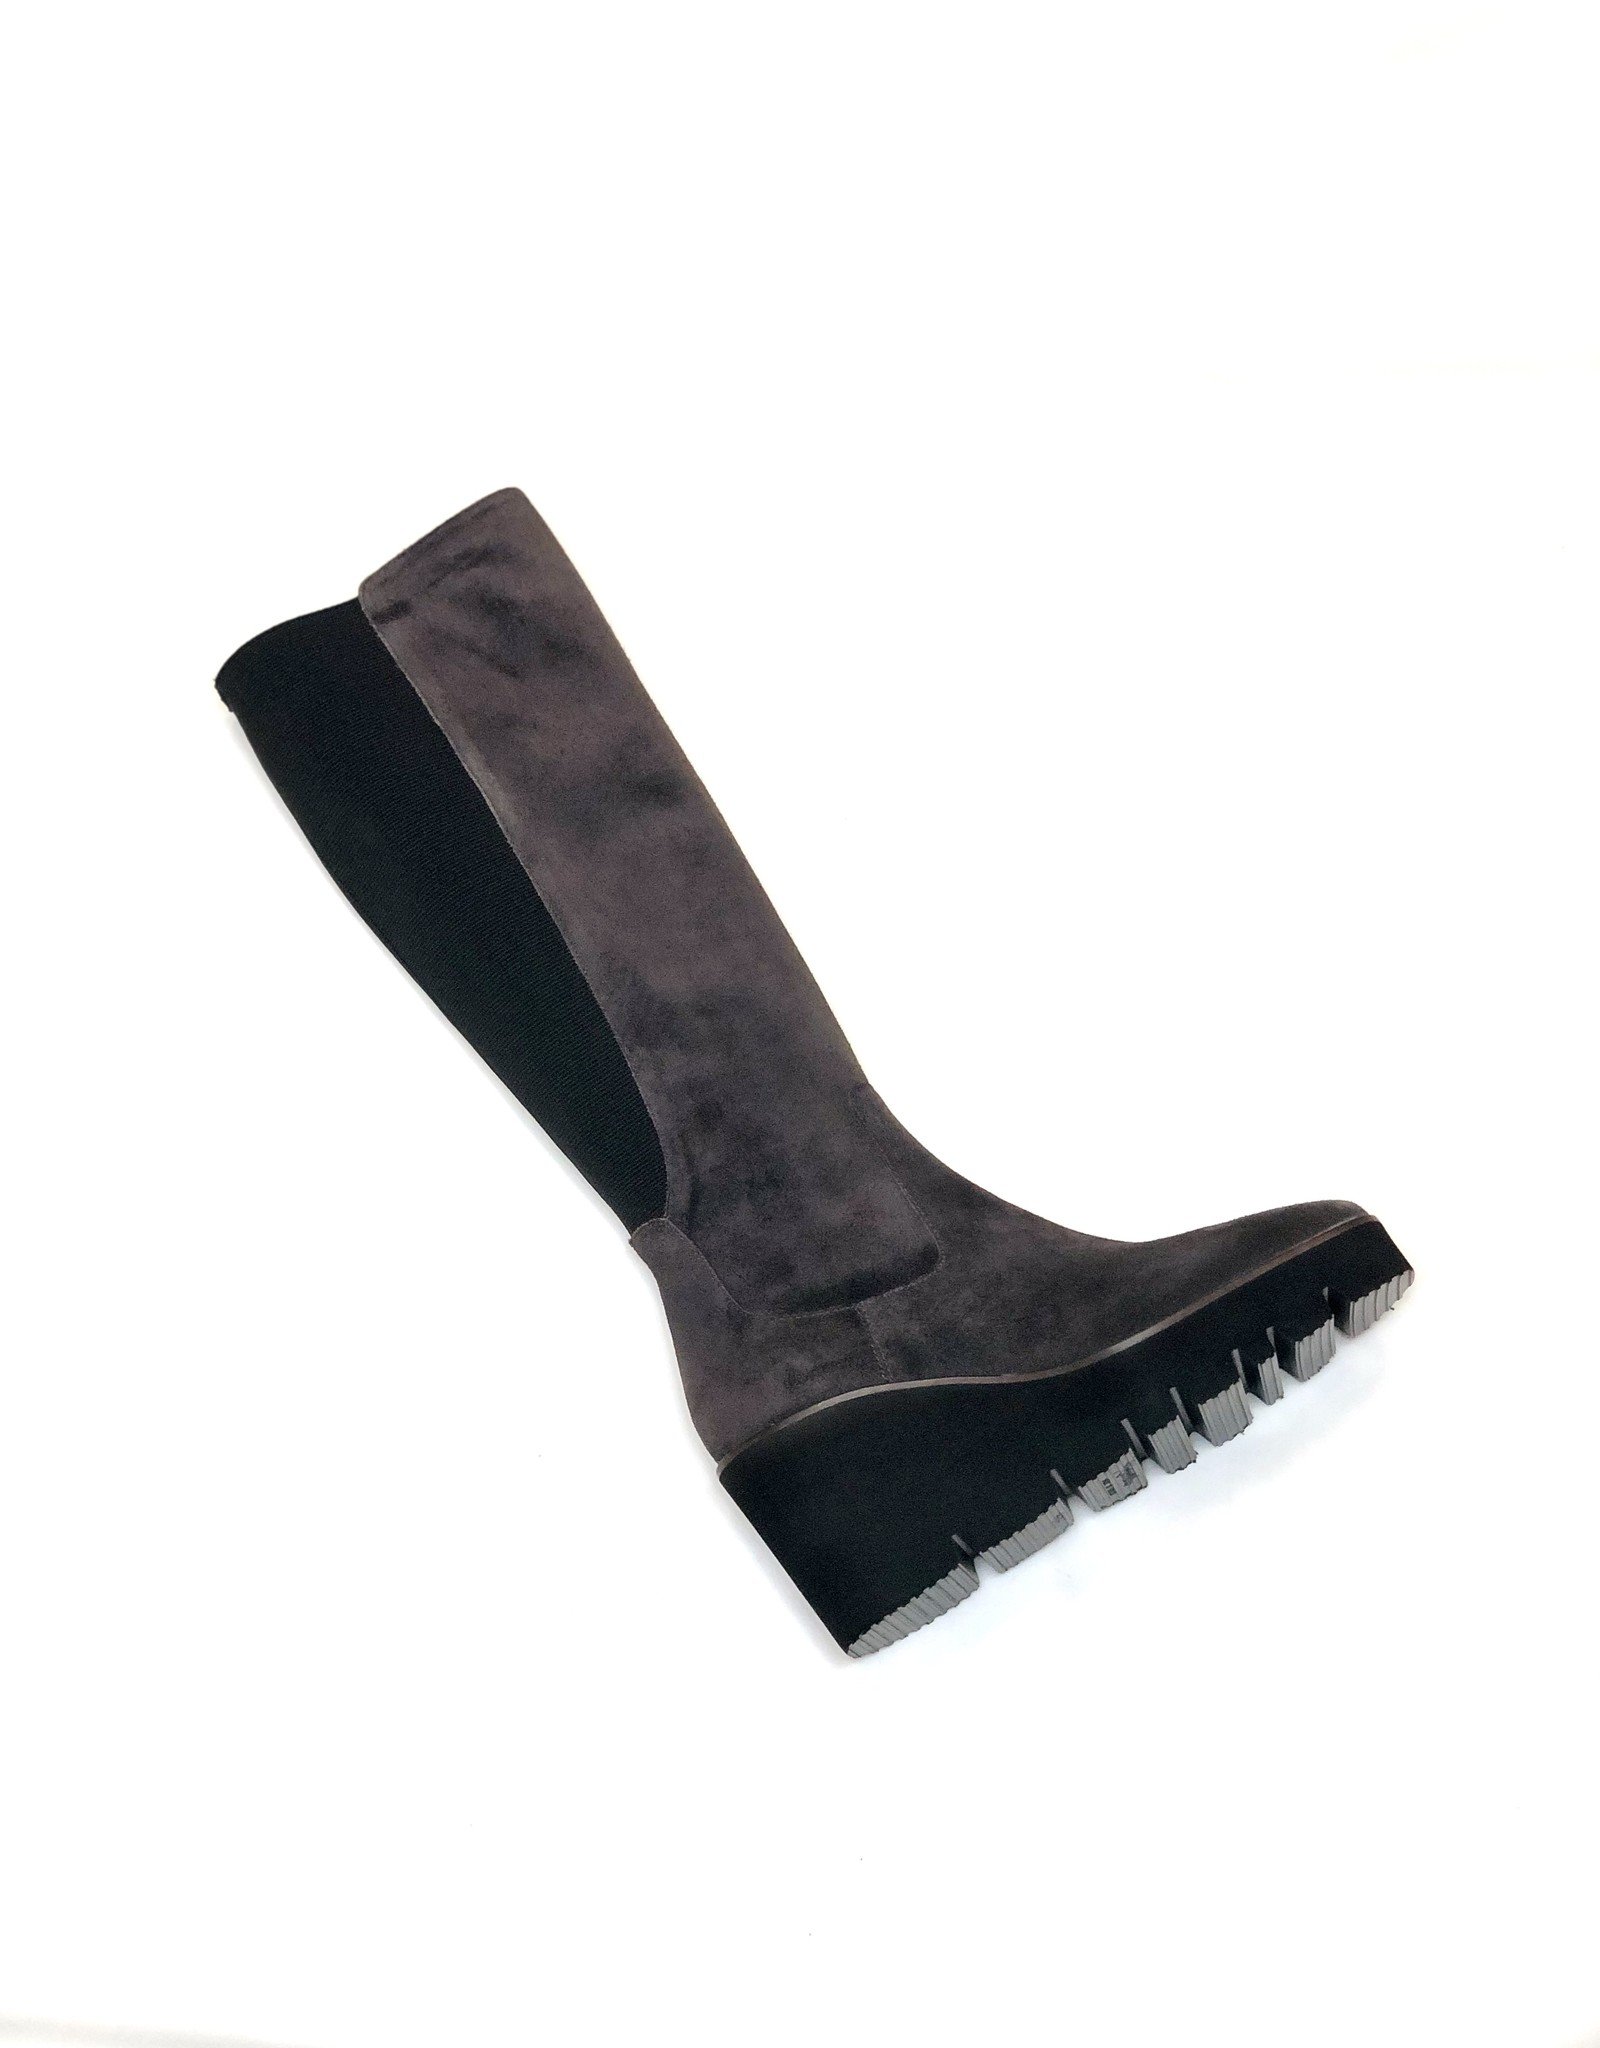 HOMERS Lavagna Suede Knee Boot